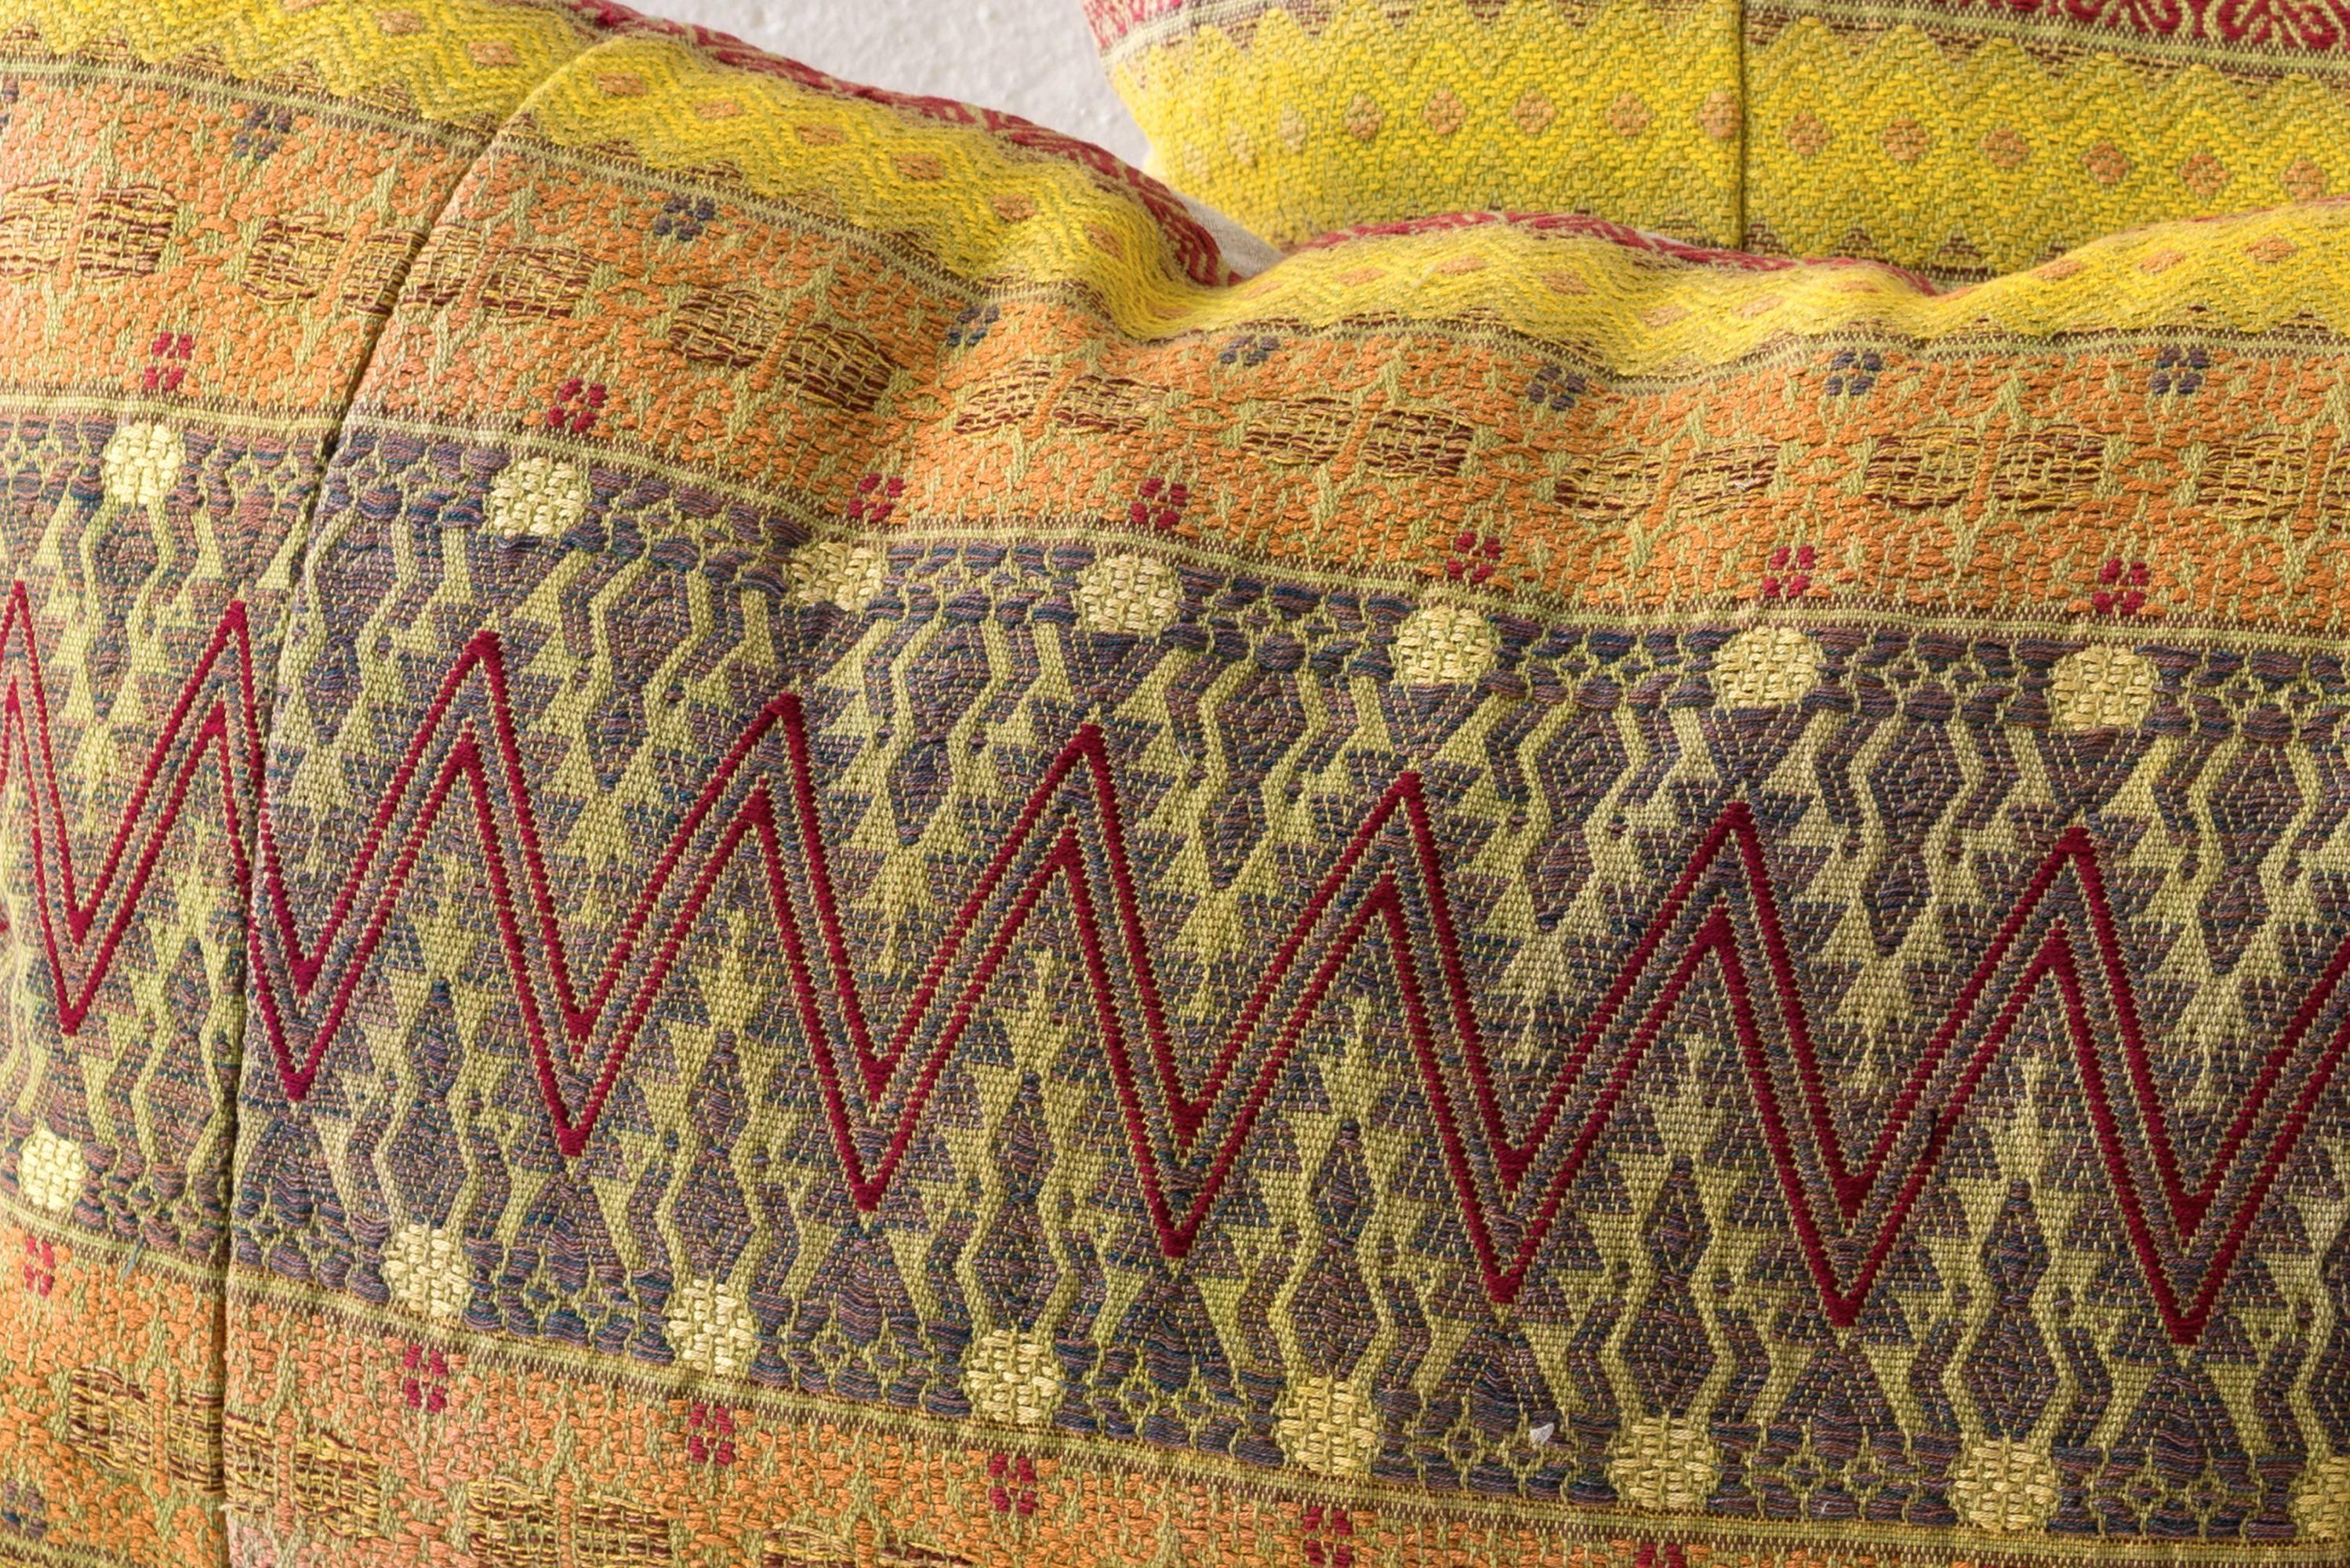 Pillows made from a contemporary hand loomed textile from Mitla, Oaxaca.  Mitla has one of the most important  archeological sites to the Zapotec culture. This textile is artisan made, in a a zig zag motif. 

Linen on reverse, see image
75/25 goose